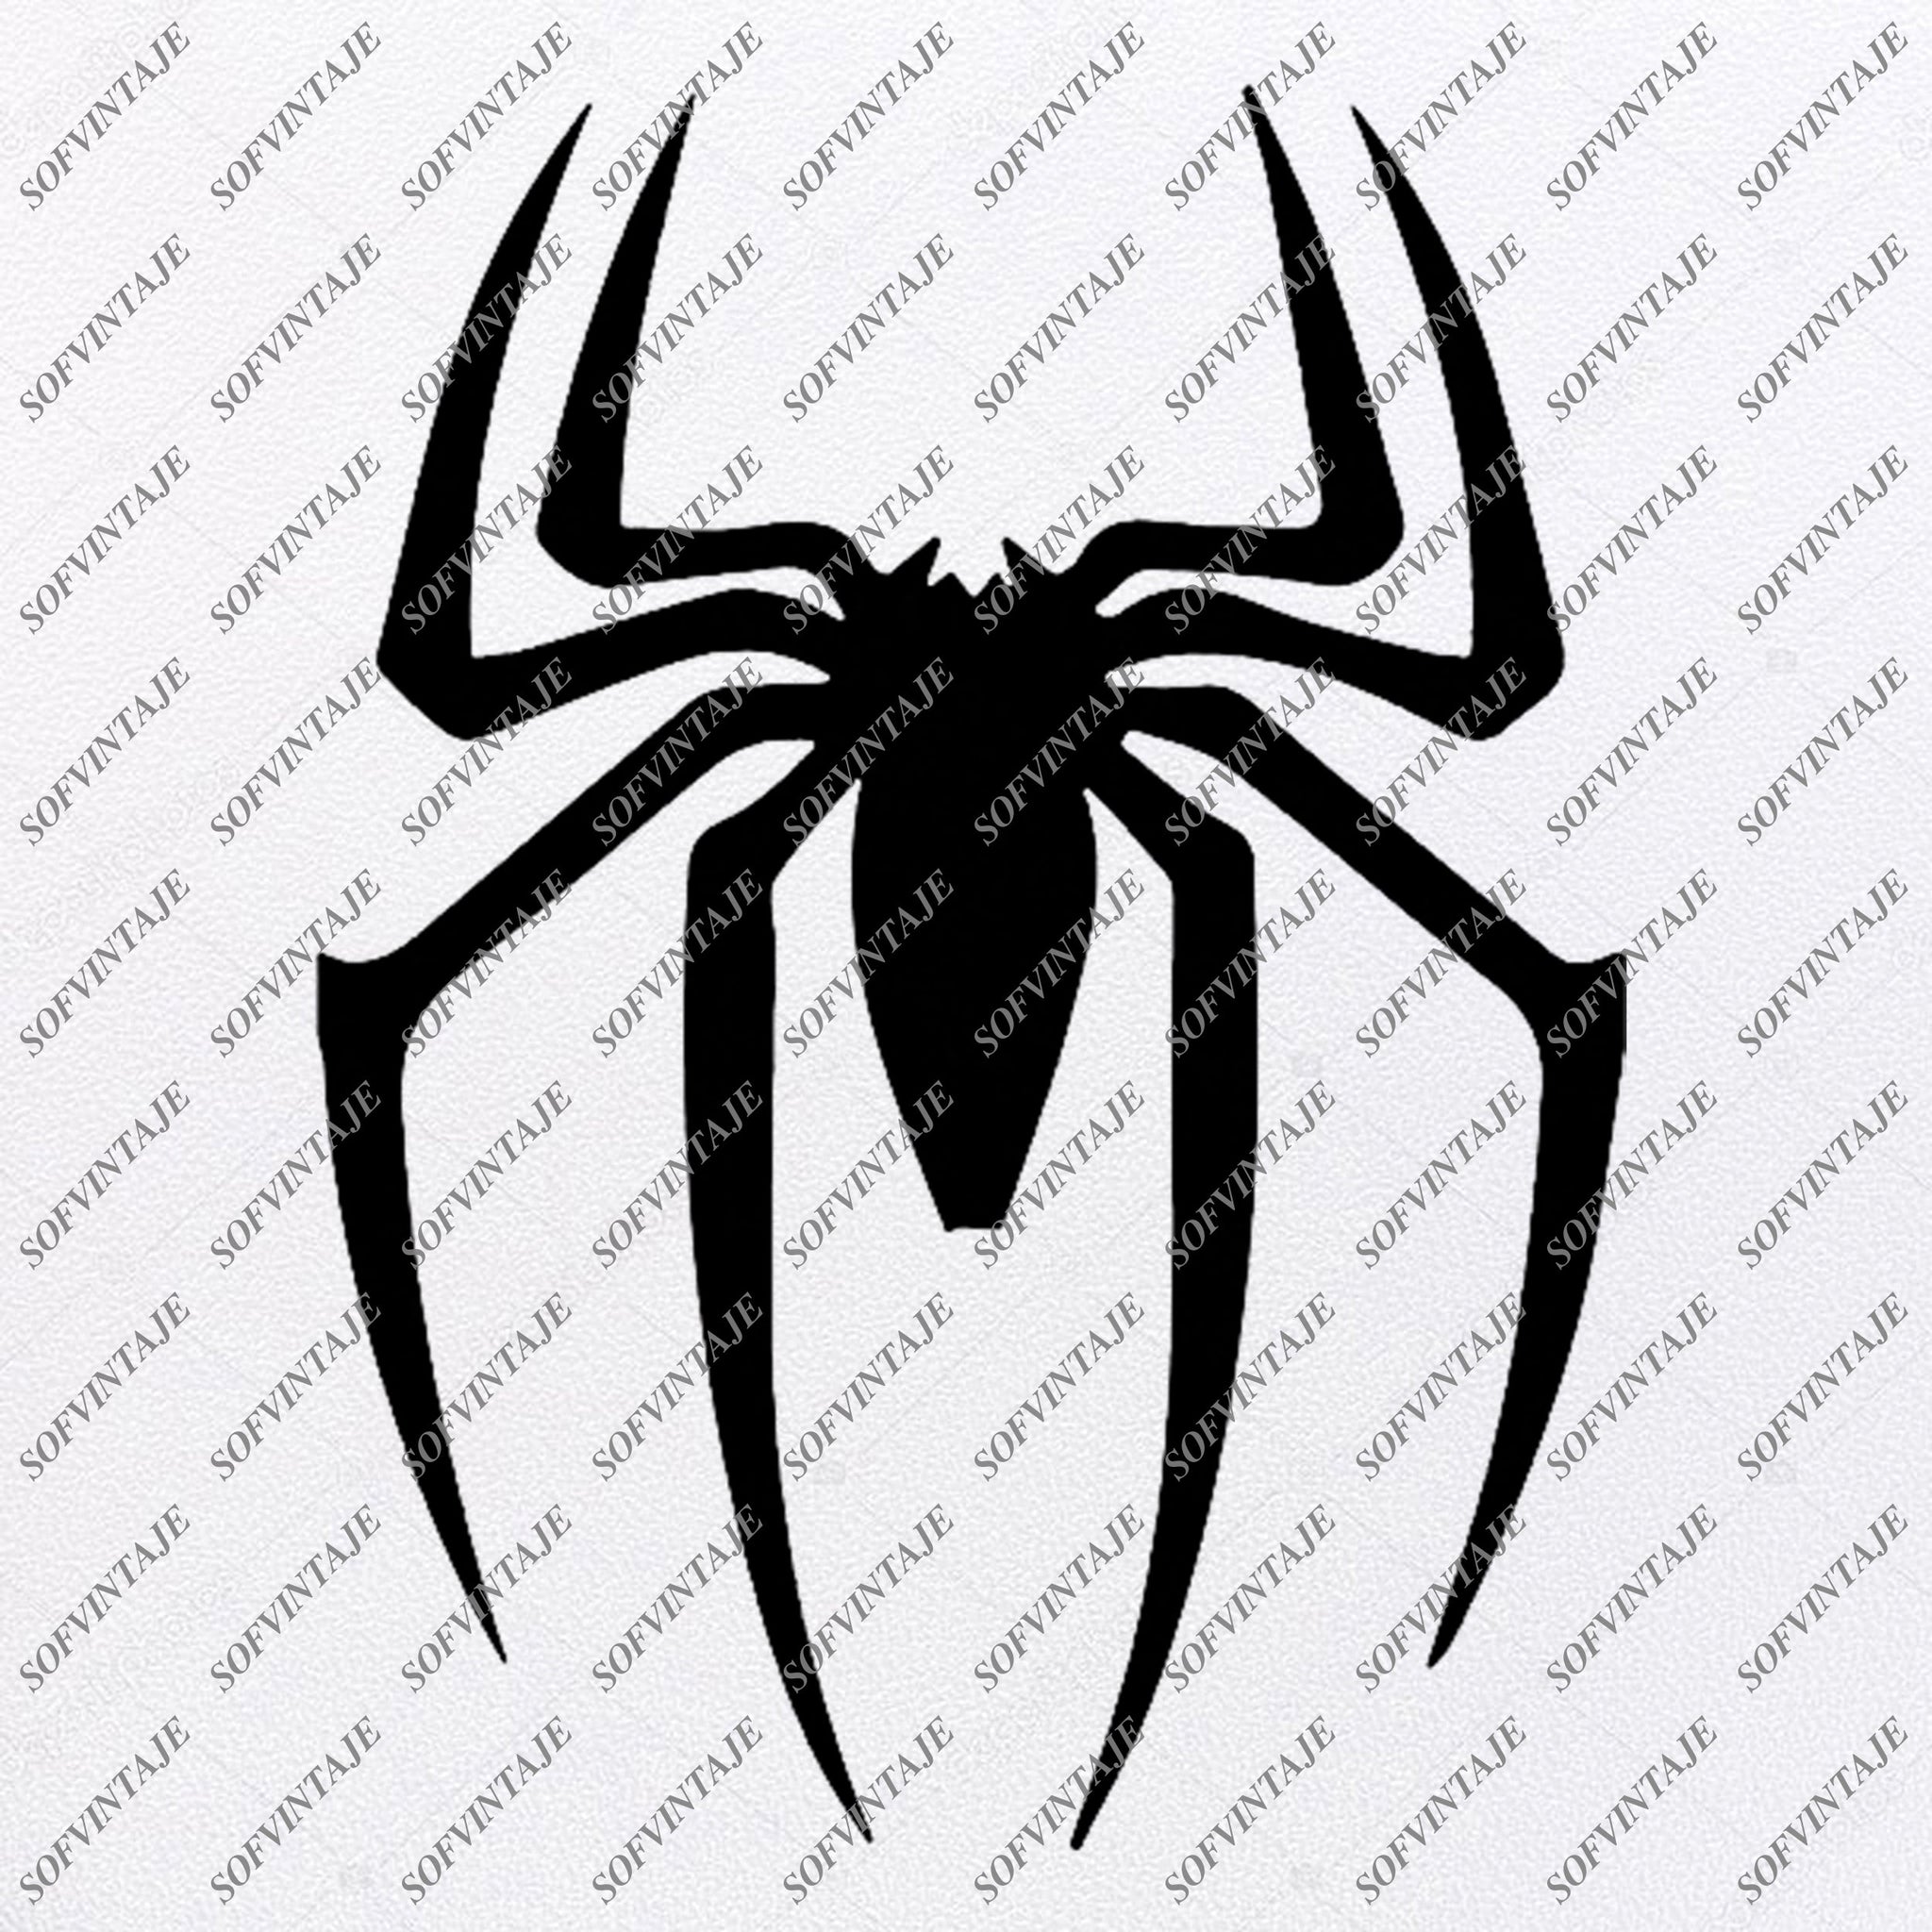 Download 38+ Cricut Spiderman Svg Free PNG Free SVG files ...